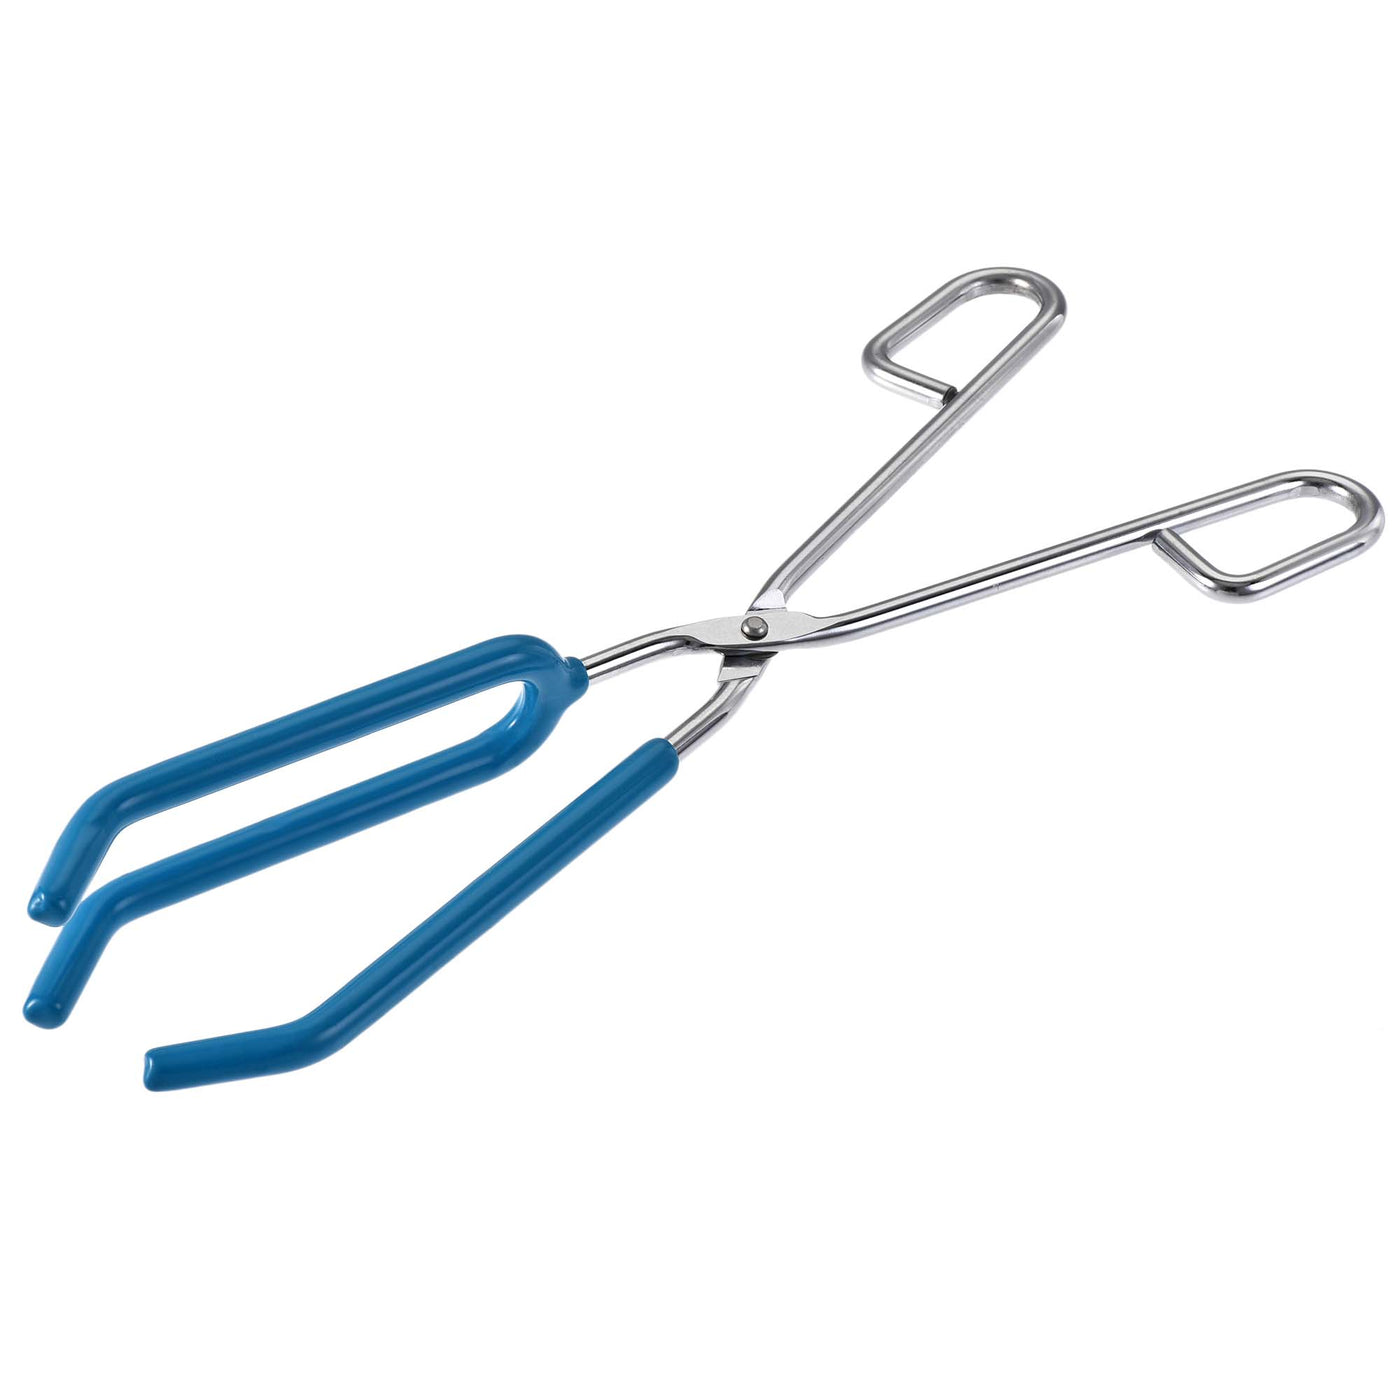 uxcell Uxcell Lab Beaker Tongs 3 Prongs Stainless Steel 11.81-inch Opens Up to 180mm Width Blue